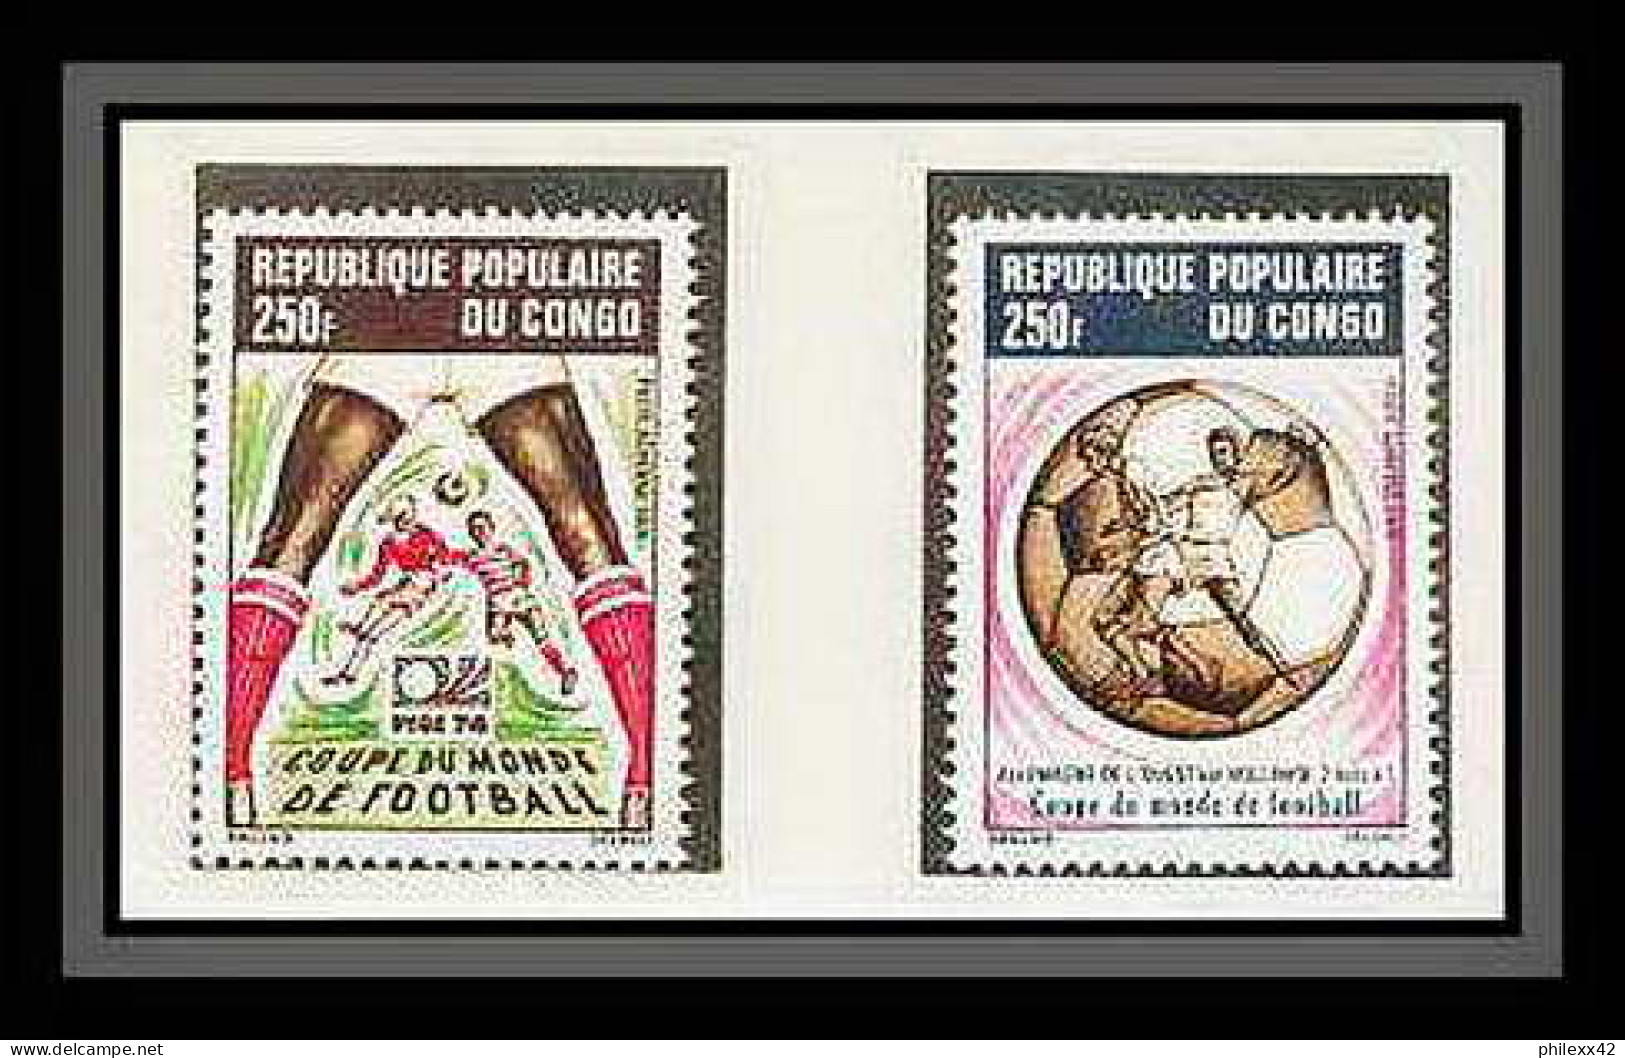 285 Football (Soccer) Allemagne 1974 Munich - Neuf ** MNH - Congo N° 411/6  - 1974 – Alemania Occidental